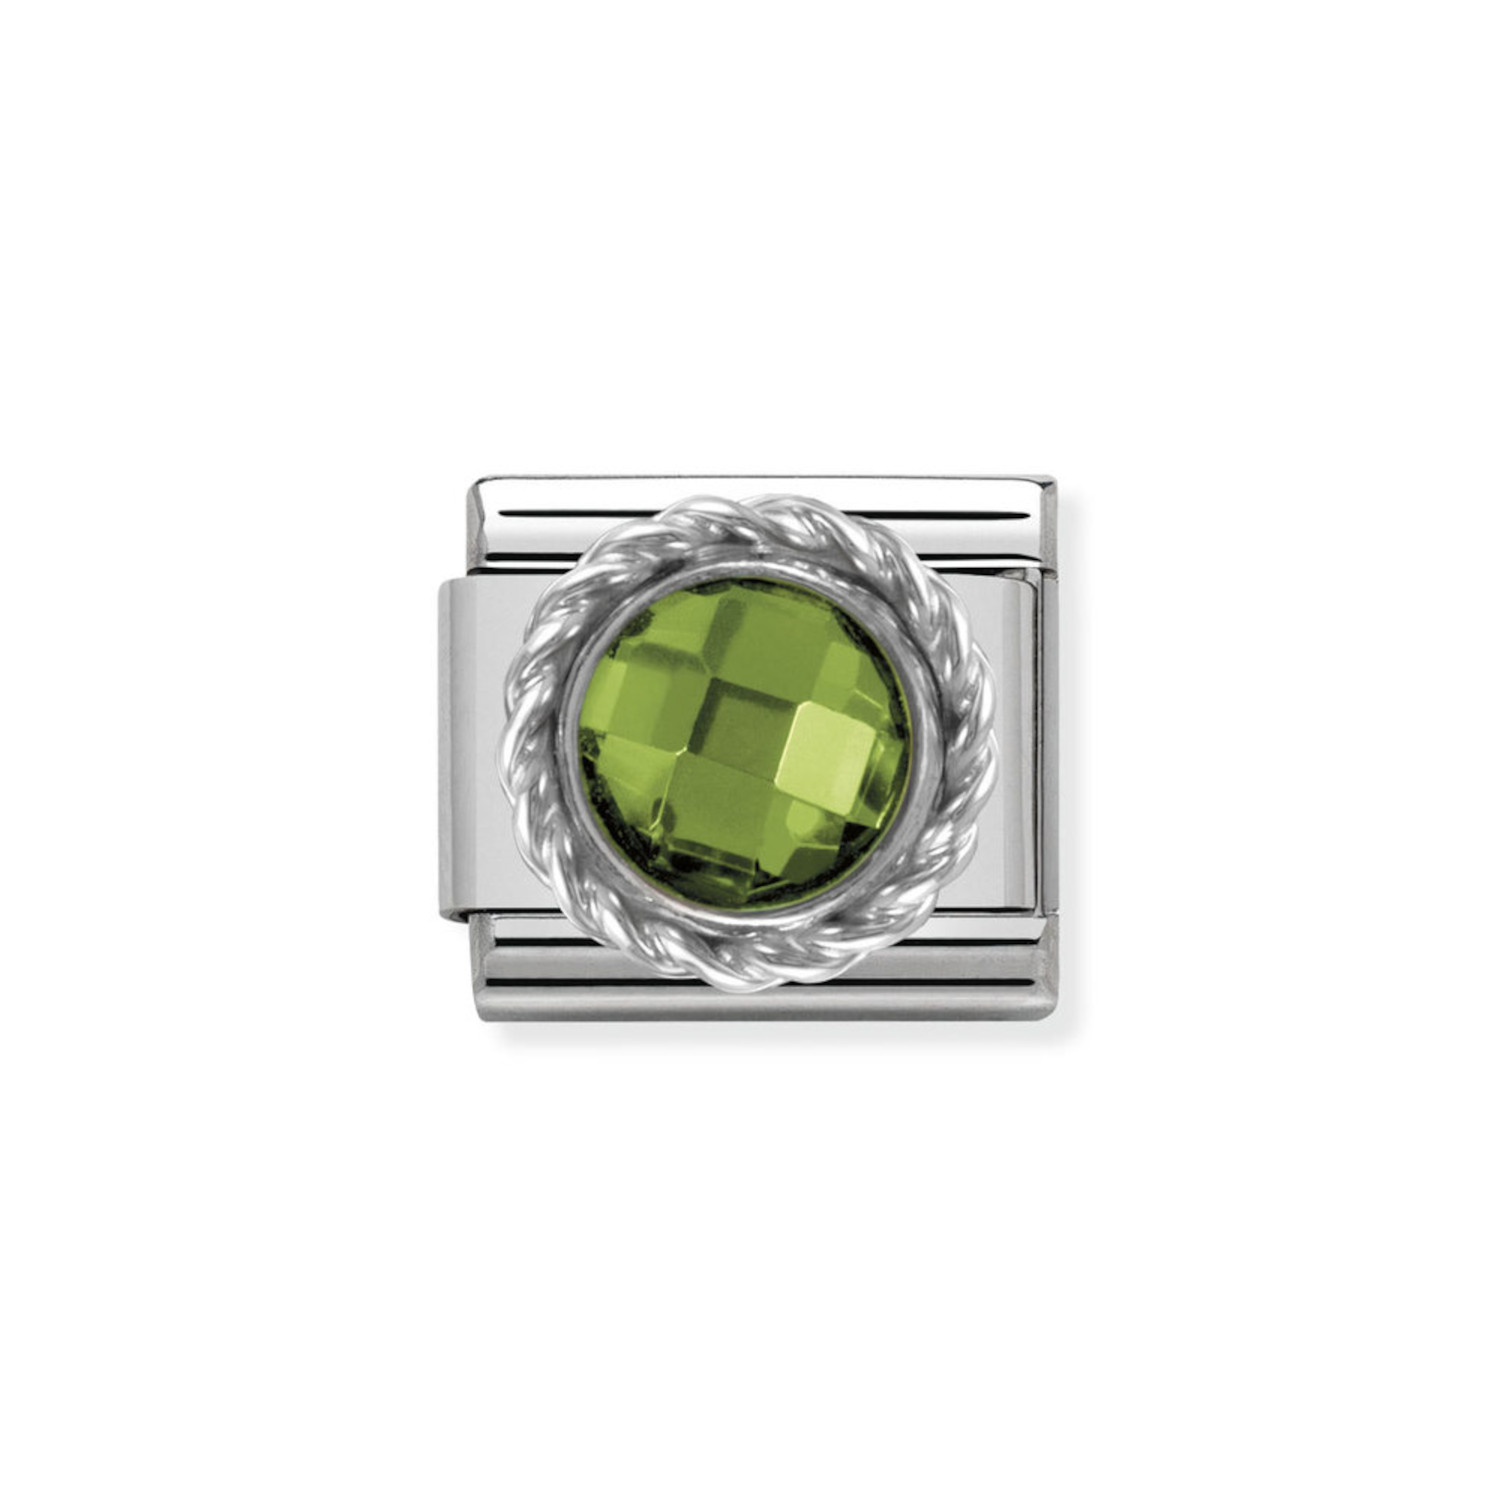 NOMINATION COMPOSABLE CLASSIC LINK IN STERLING SILVER WITH ROUND FACETED GREEN STONE 330601/004